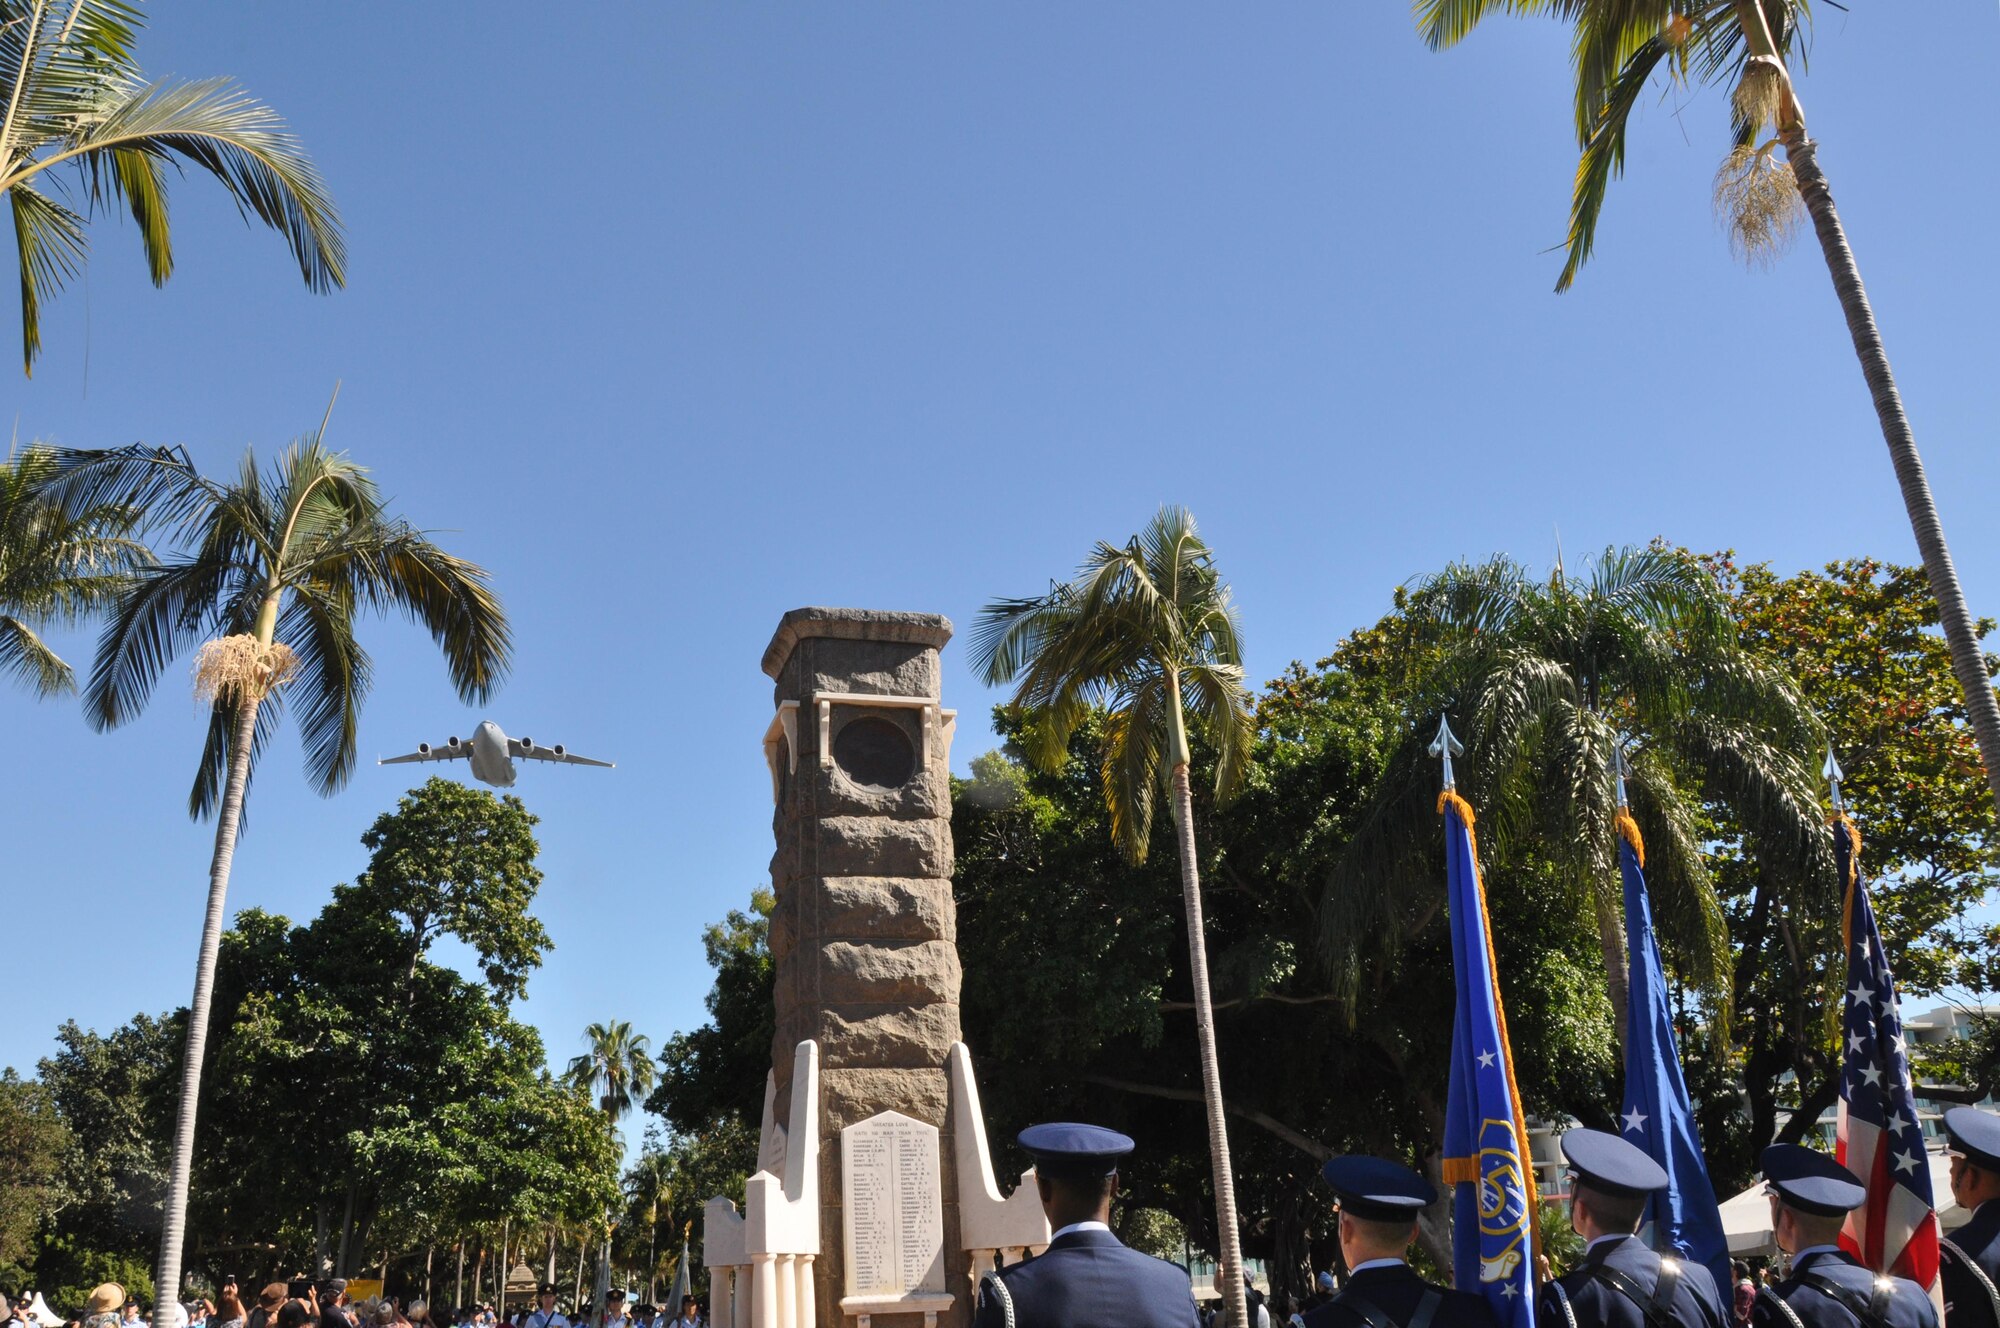 A Royal Australian Air Force C-17 preforms a flyover at the start of the Townsville, Australia VP70 Memorial Service as members of the Yokota Air Base Honor Guard stand at attention, Aug 15, 2015. The service took place at ANZAC Park and honored all those who gave their lives in the defense of their country and led to victory in the Pacific 70 years ago. (U.S. Air Force photo by Capt. George M. Tobias/Released)